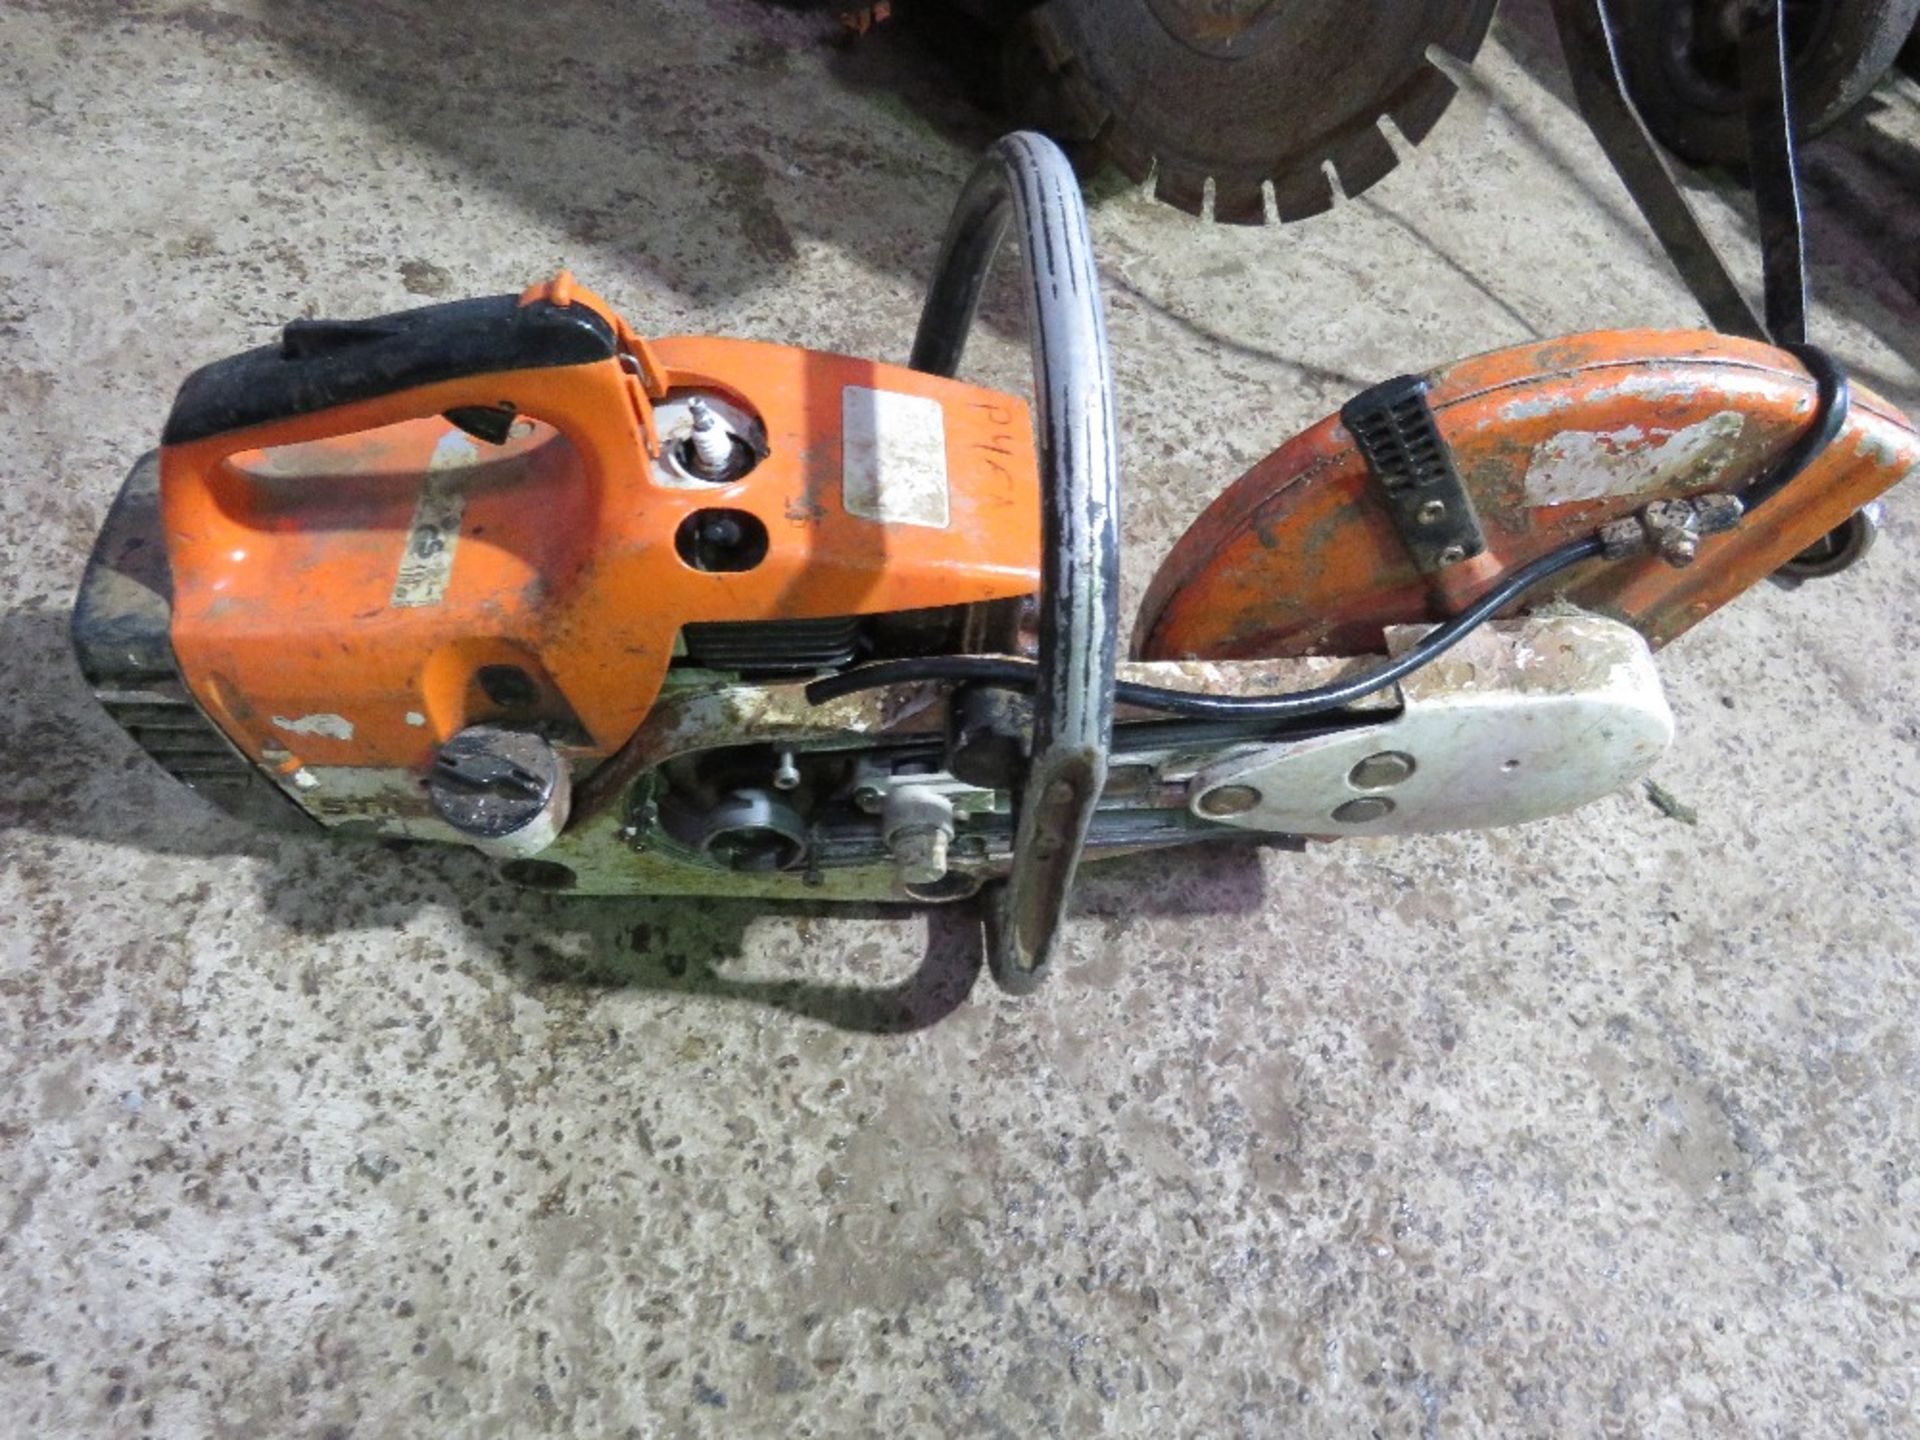 STIHL TS400 PETROL ENGINED CUT OFF SAW. THIS LOT IS SOLD UNDER THE AUCTIONEERS MARGIN SCHEME, THE